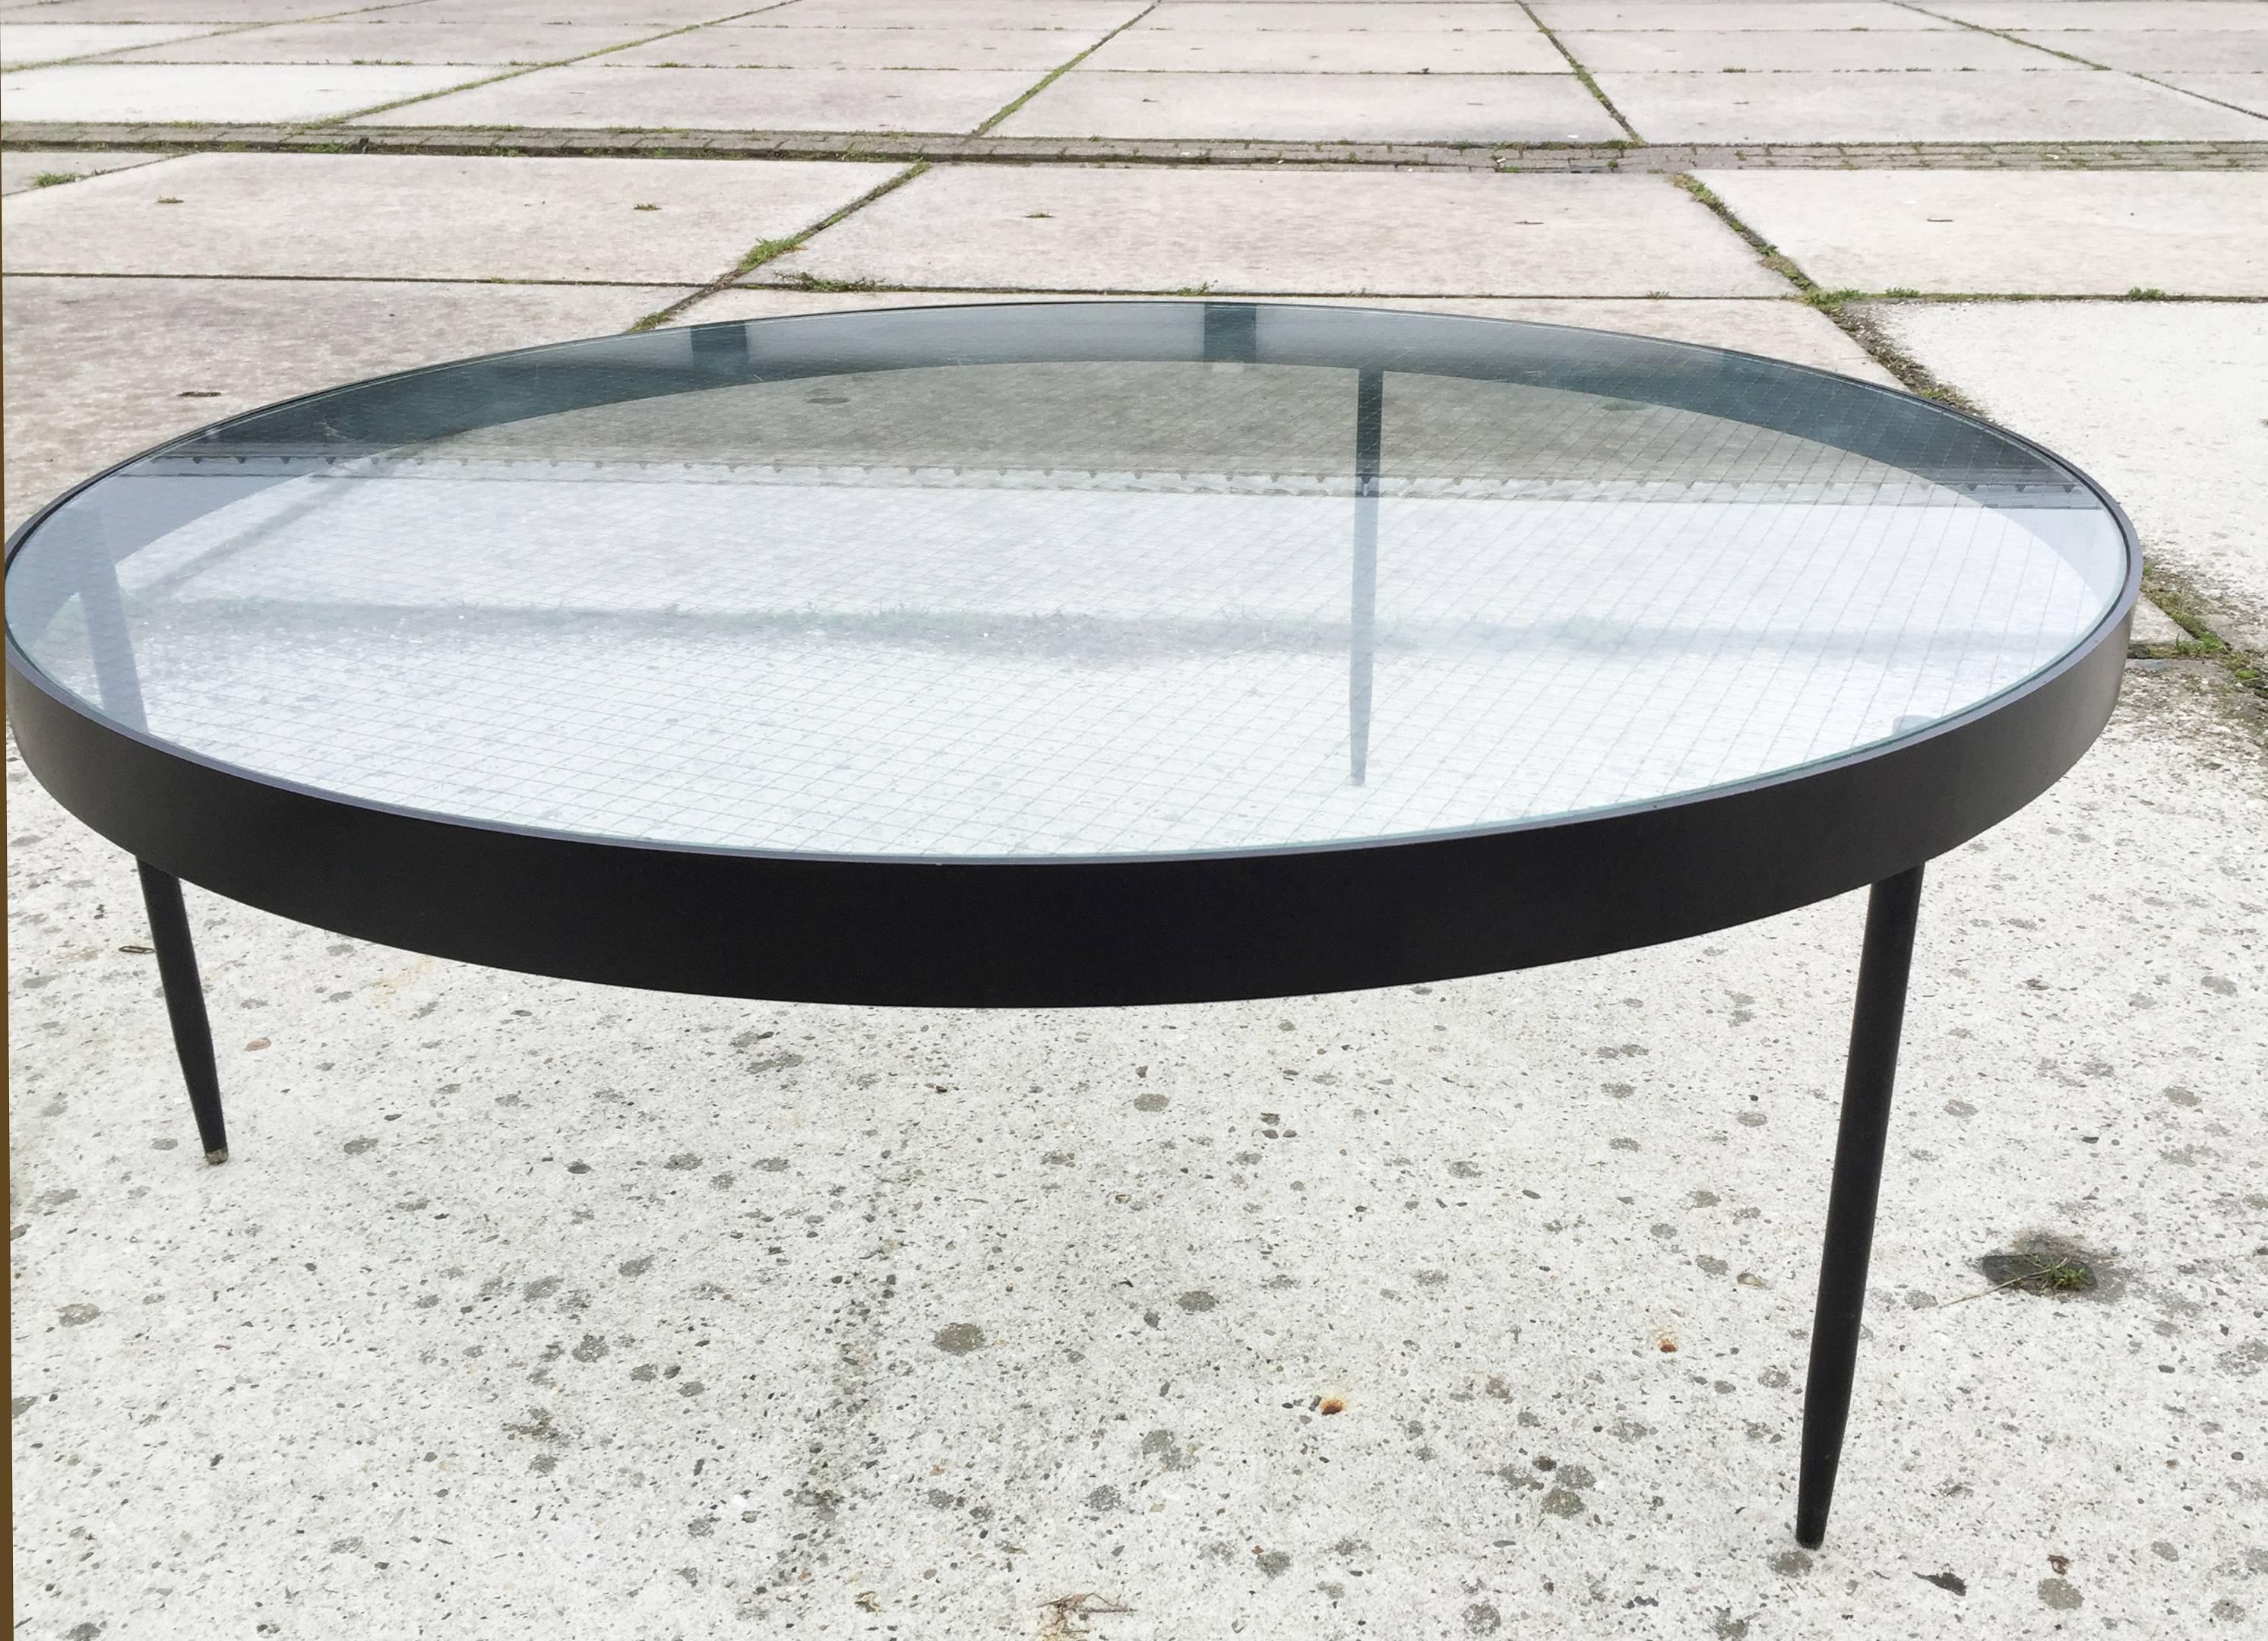 This extraordinary elegant coffee table was designed by Janni van Pelt and produced upon request by Bas van Pelt in the late fifties. The table is in excellent vintage condition with original wire glass top. This very rare piece is timeless and